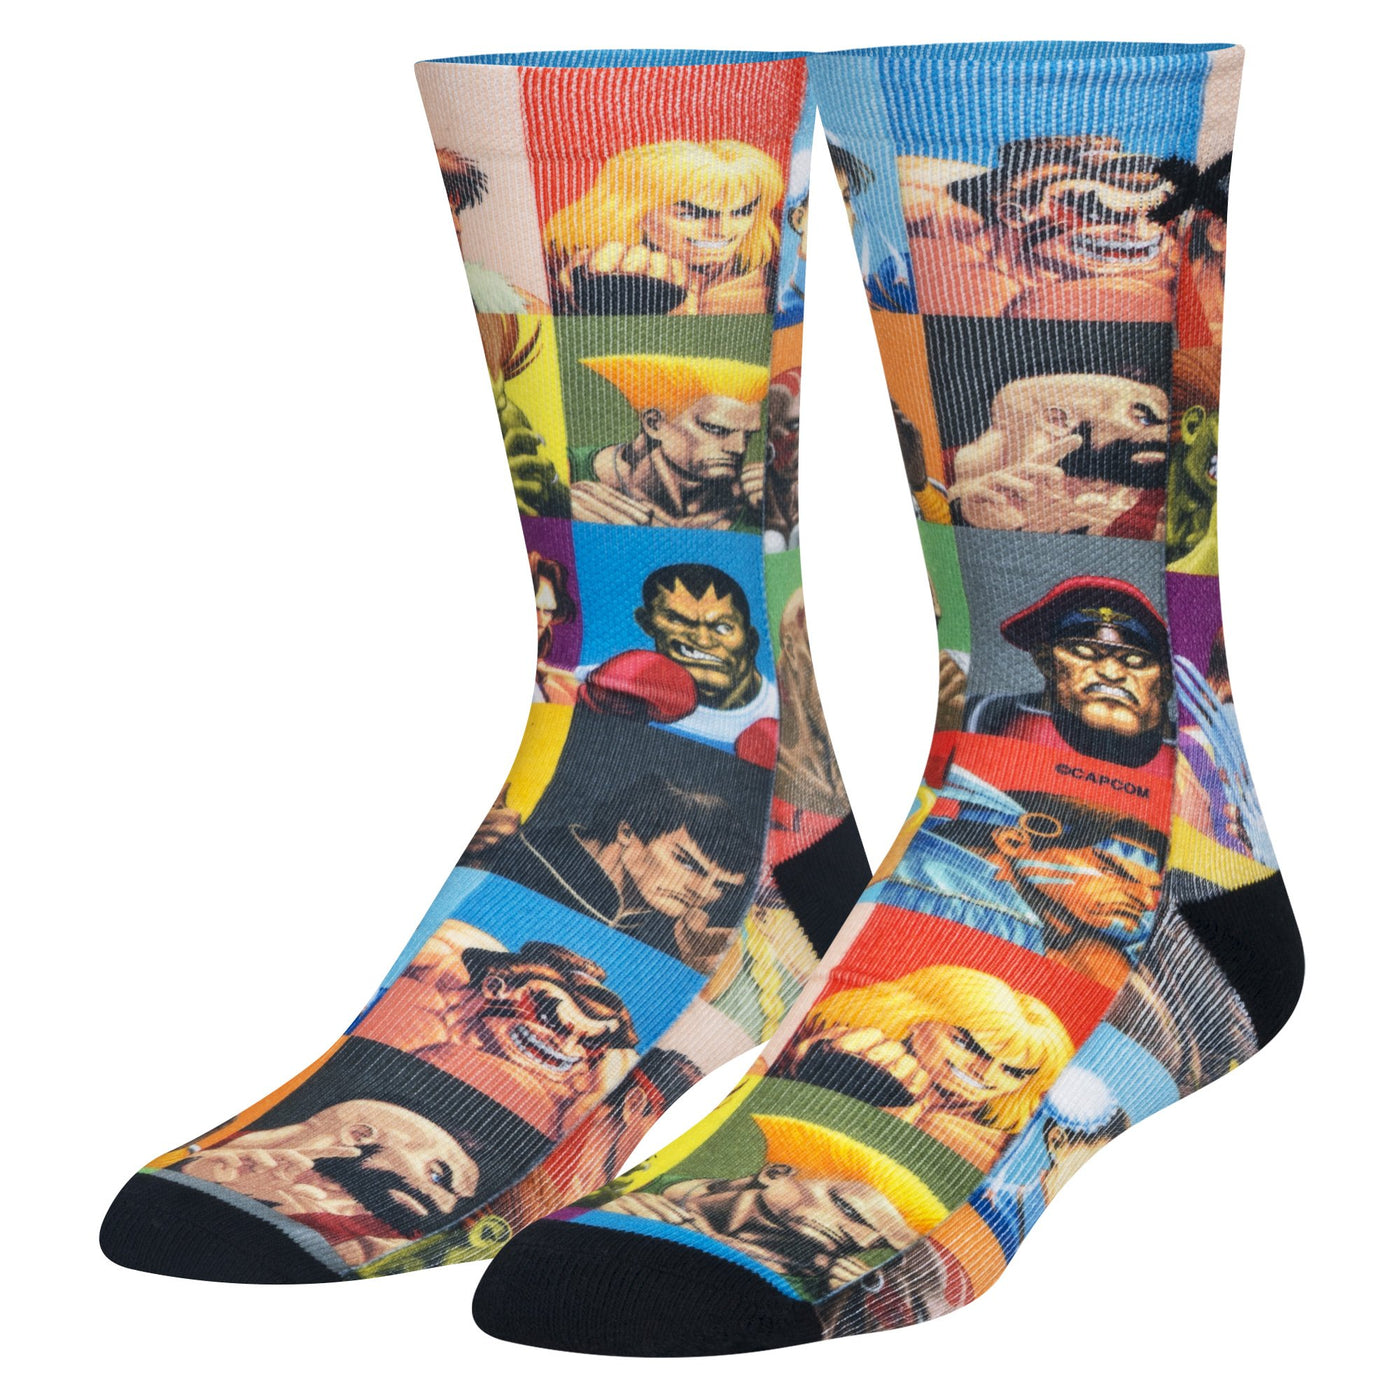 "Choose Your Fighter" Cotton Crew Socks by ODD Sox